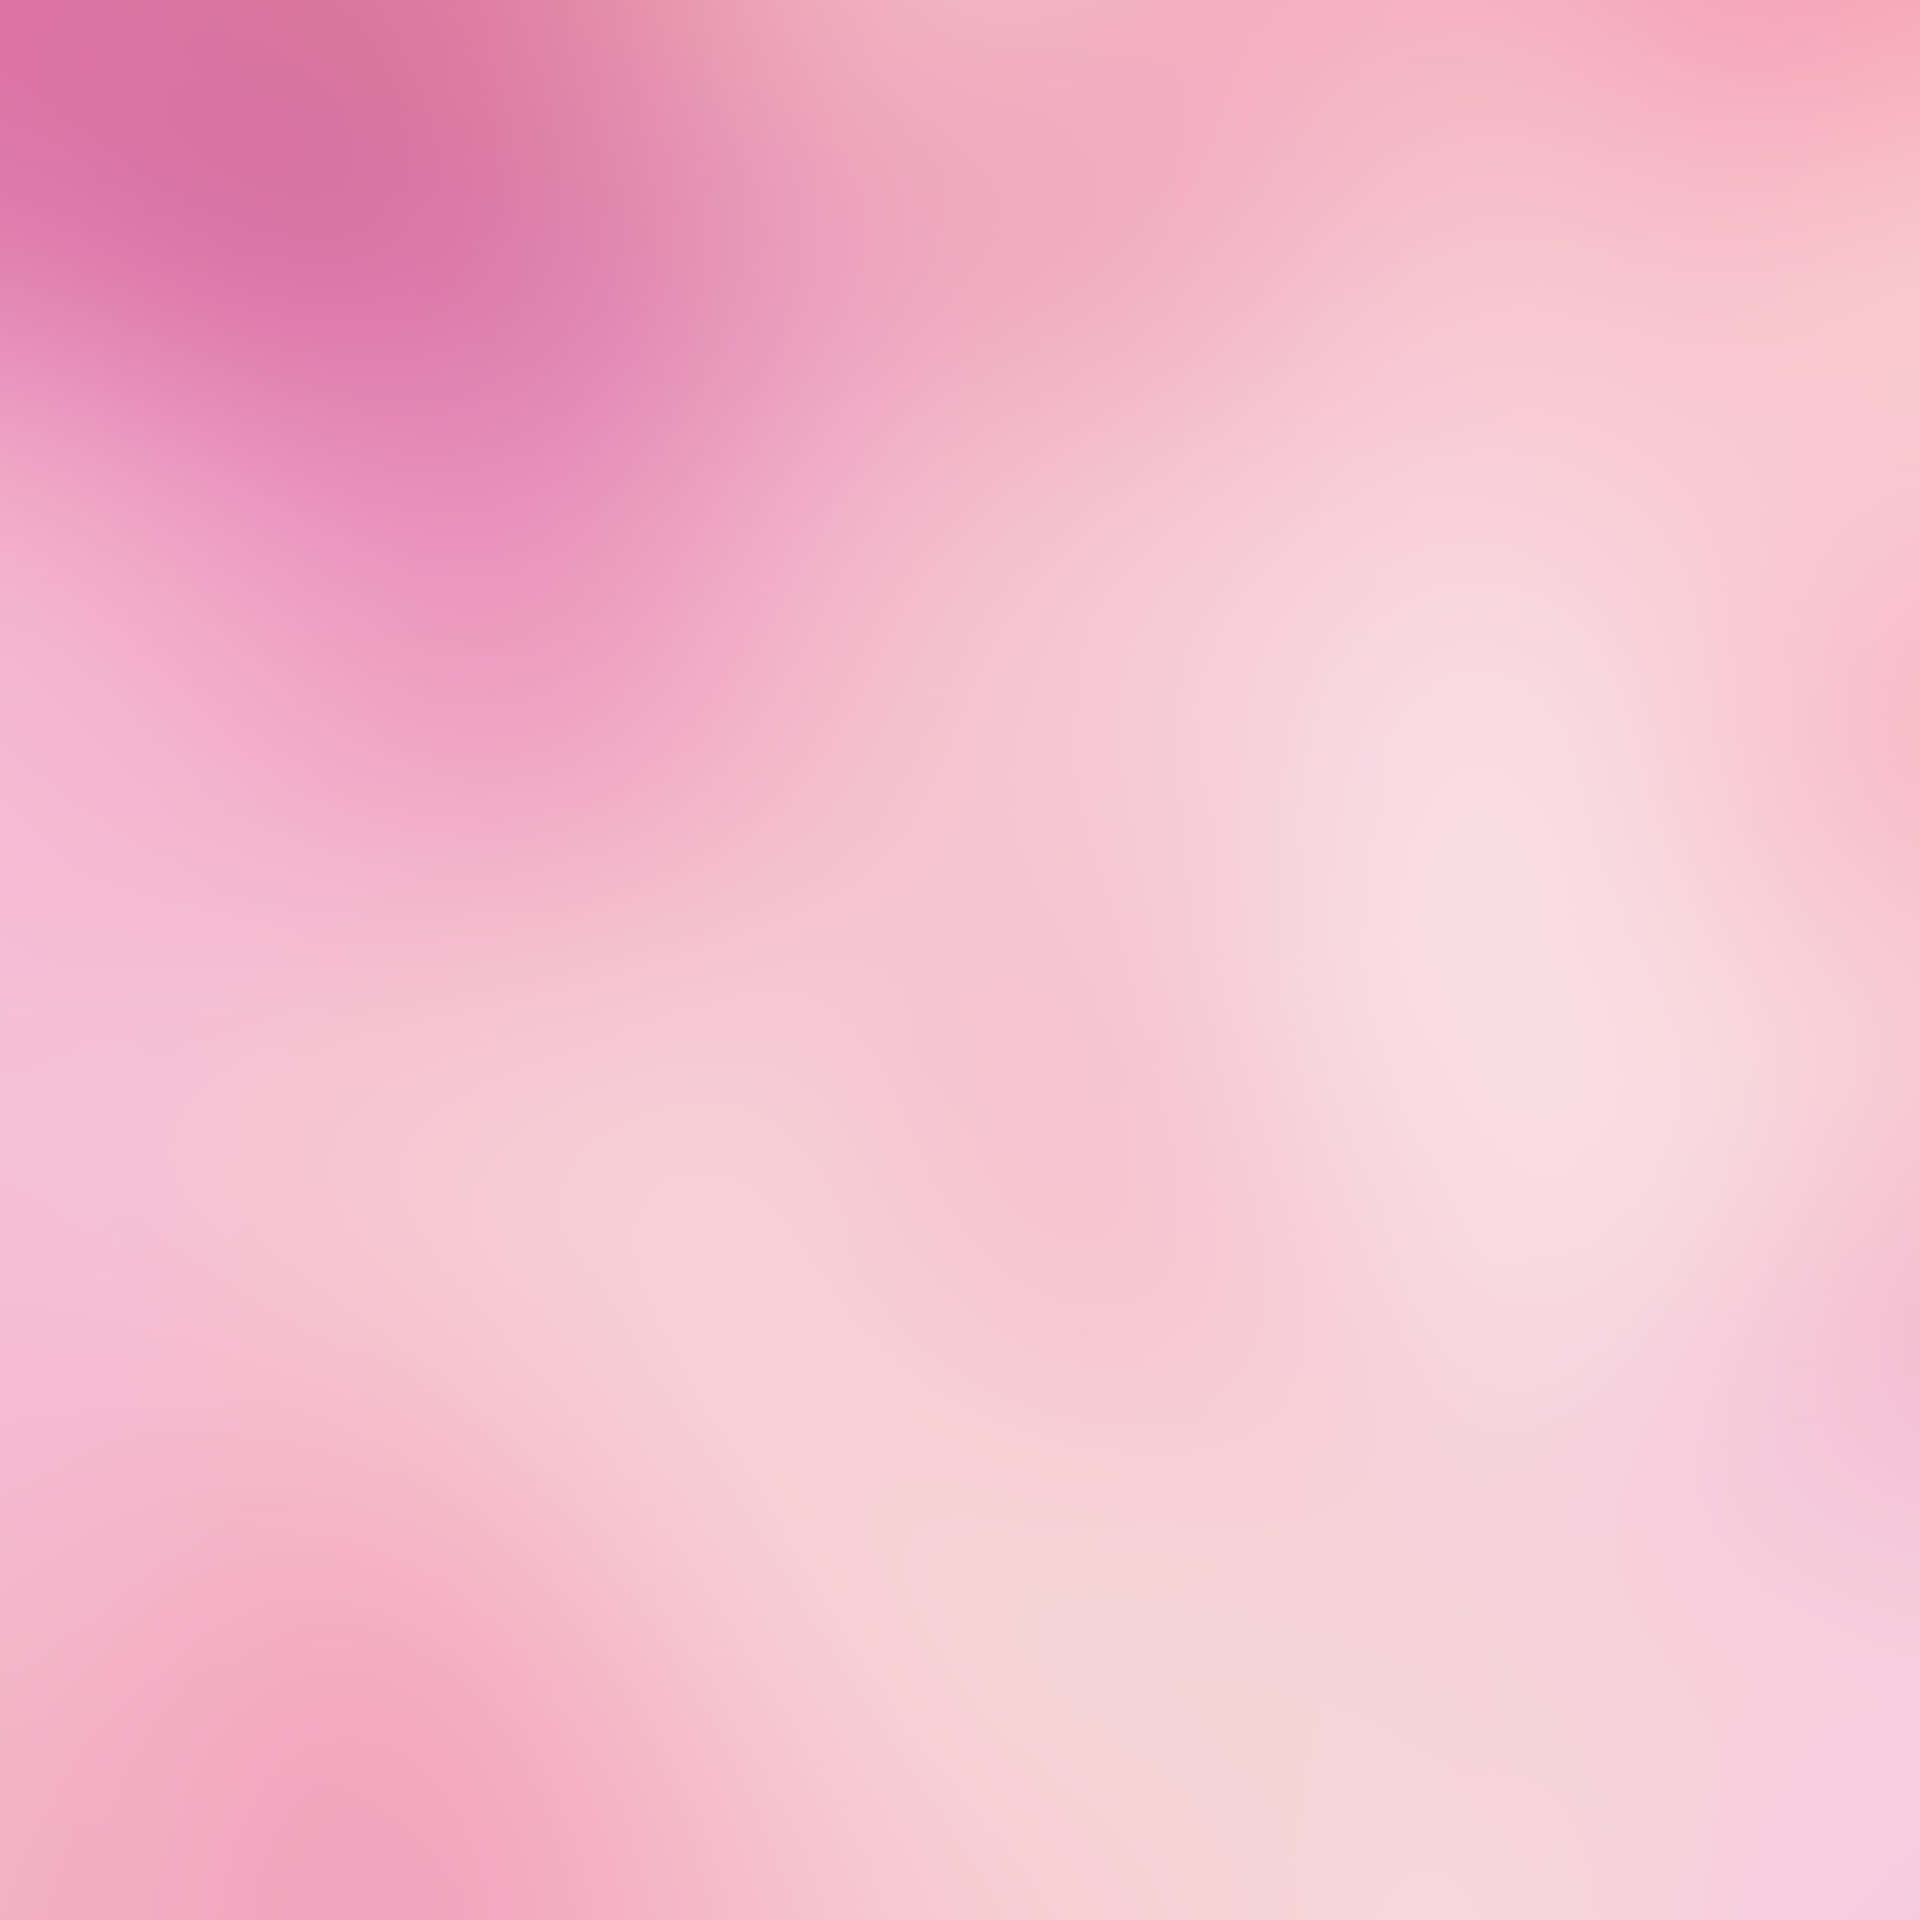 Pink And White Abstract Background Wallpaper